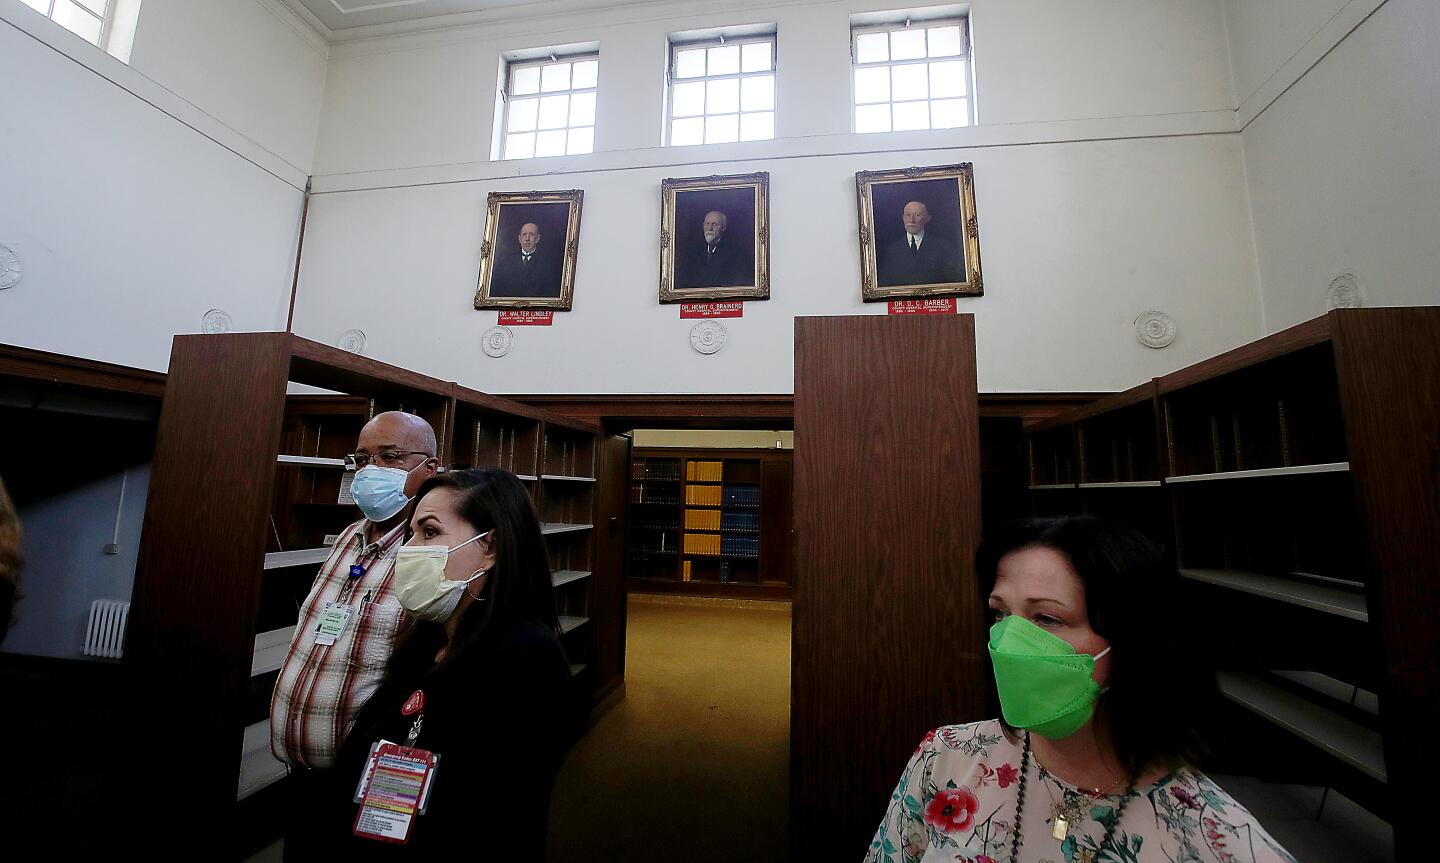 Visitors stand inside the medical library of the Los Angeles County General Hospital.